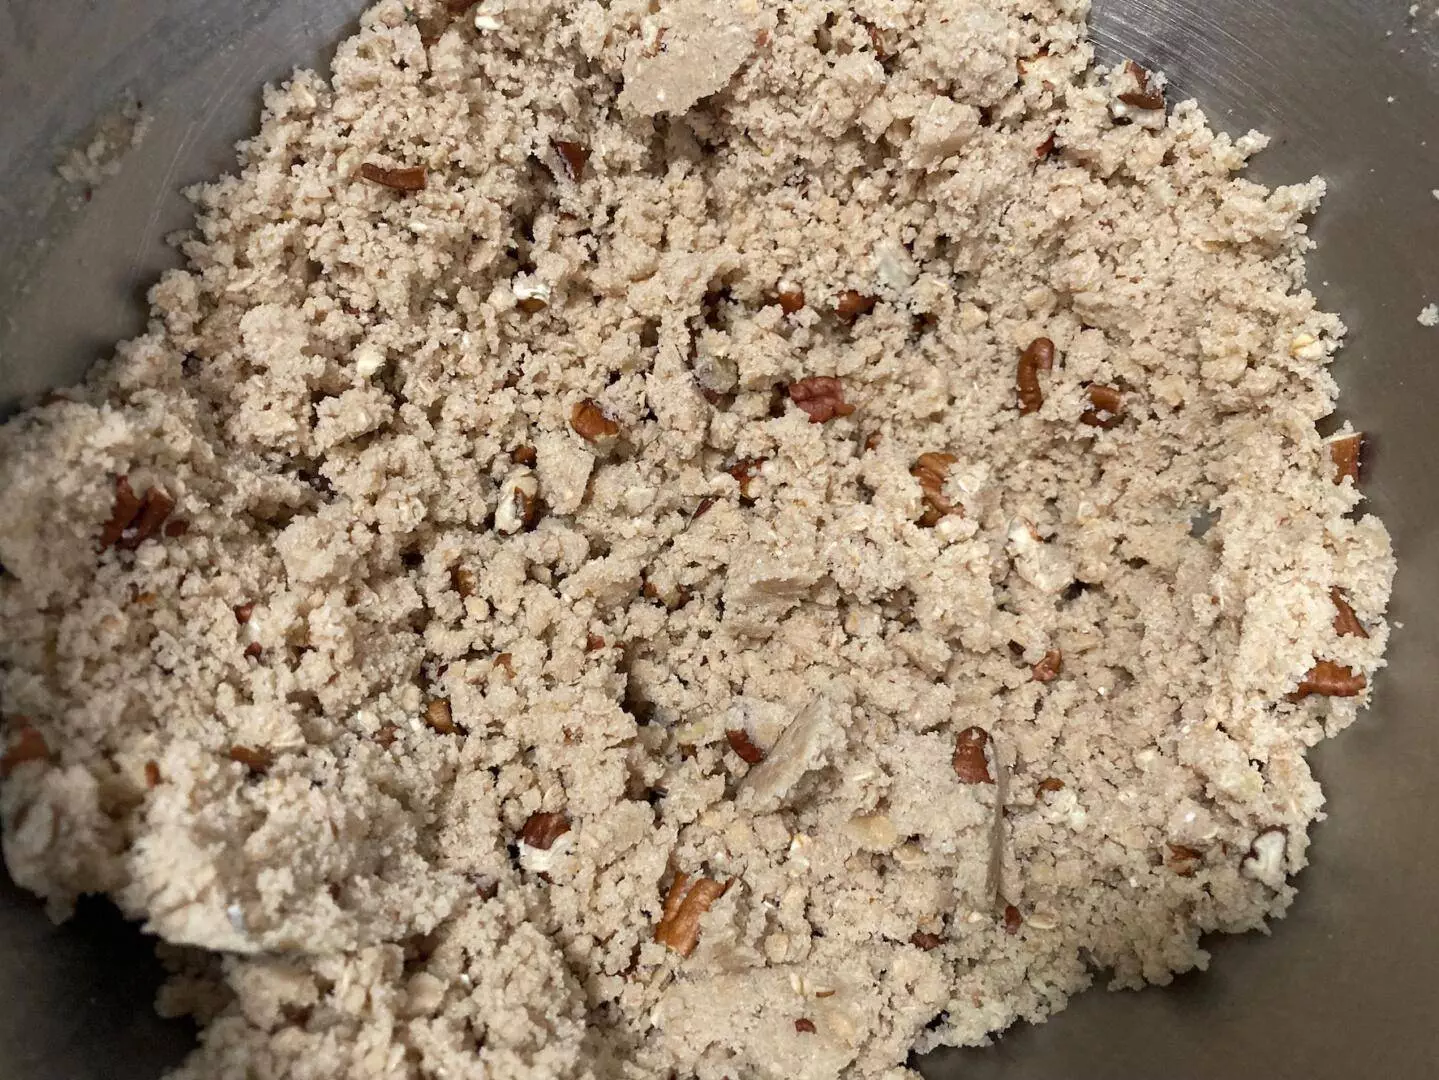 Easy Streusel Topping Recipe - Out of the Box Baking